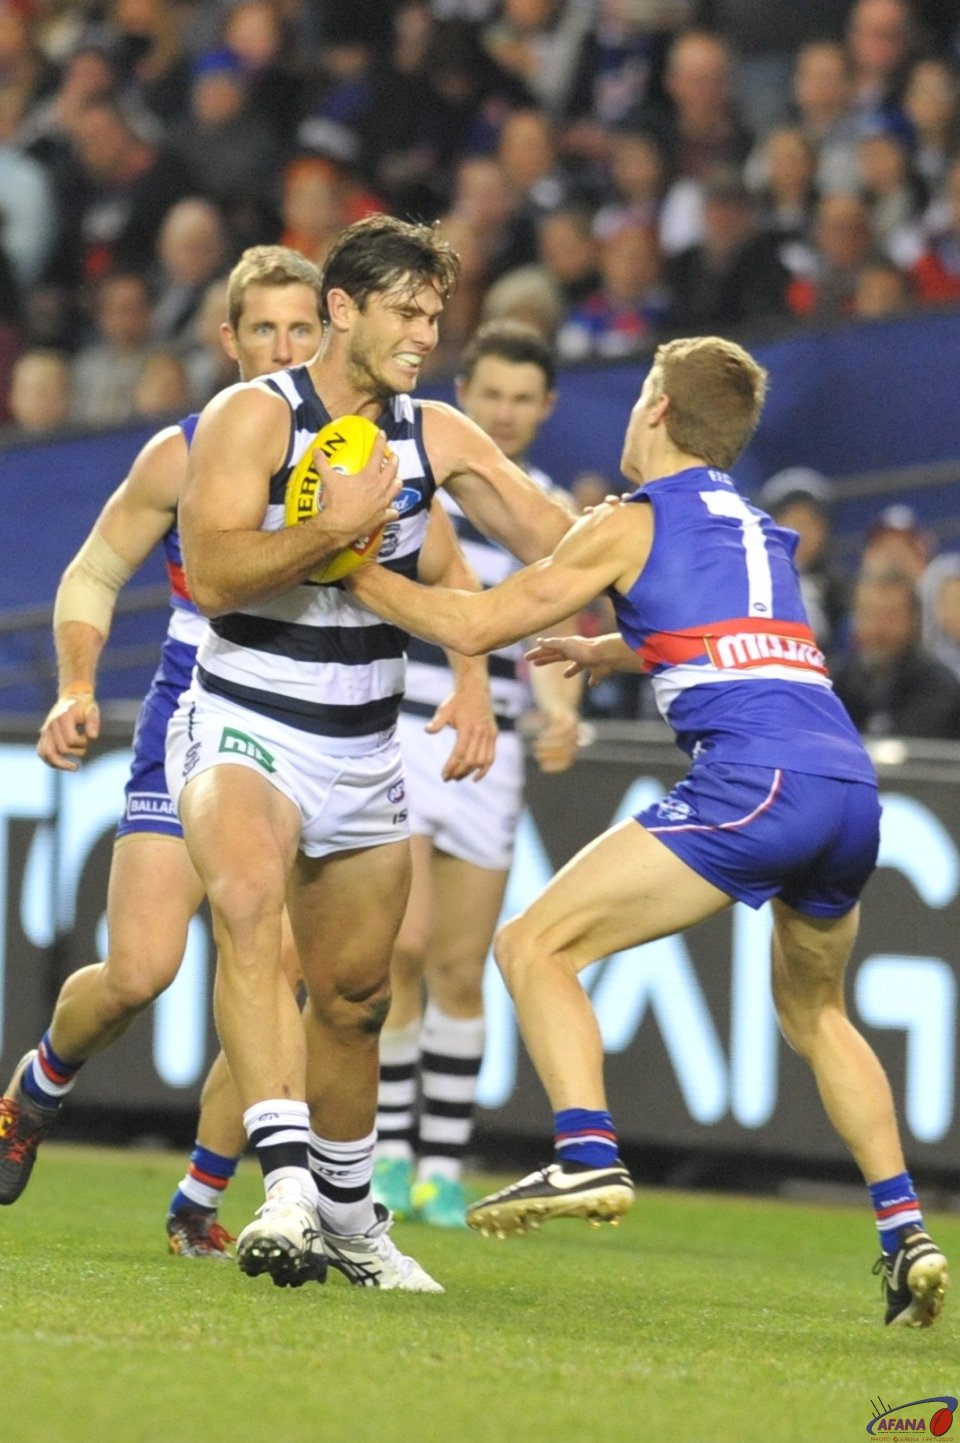 Tommahawk gives Lachie Hunter the fend off